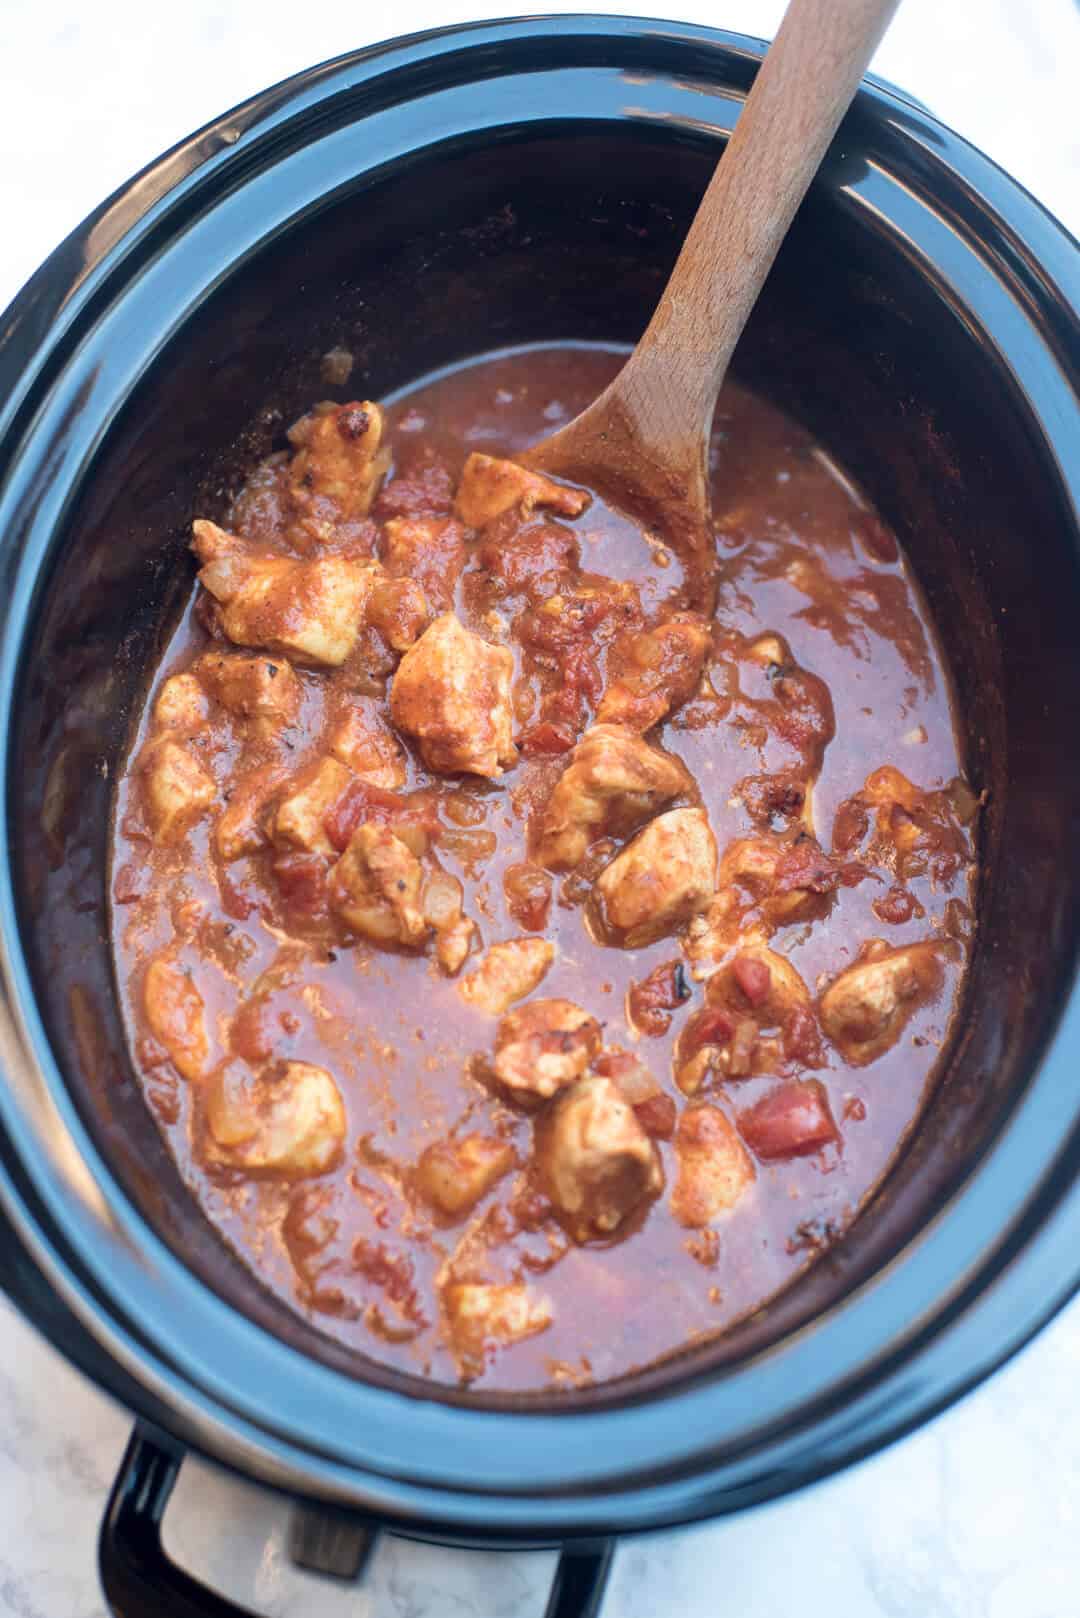 A spoon stirs cooked chicken and sauce in a slow cooker.